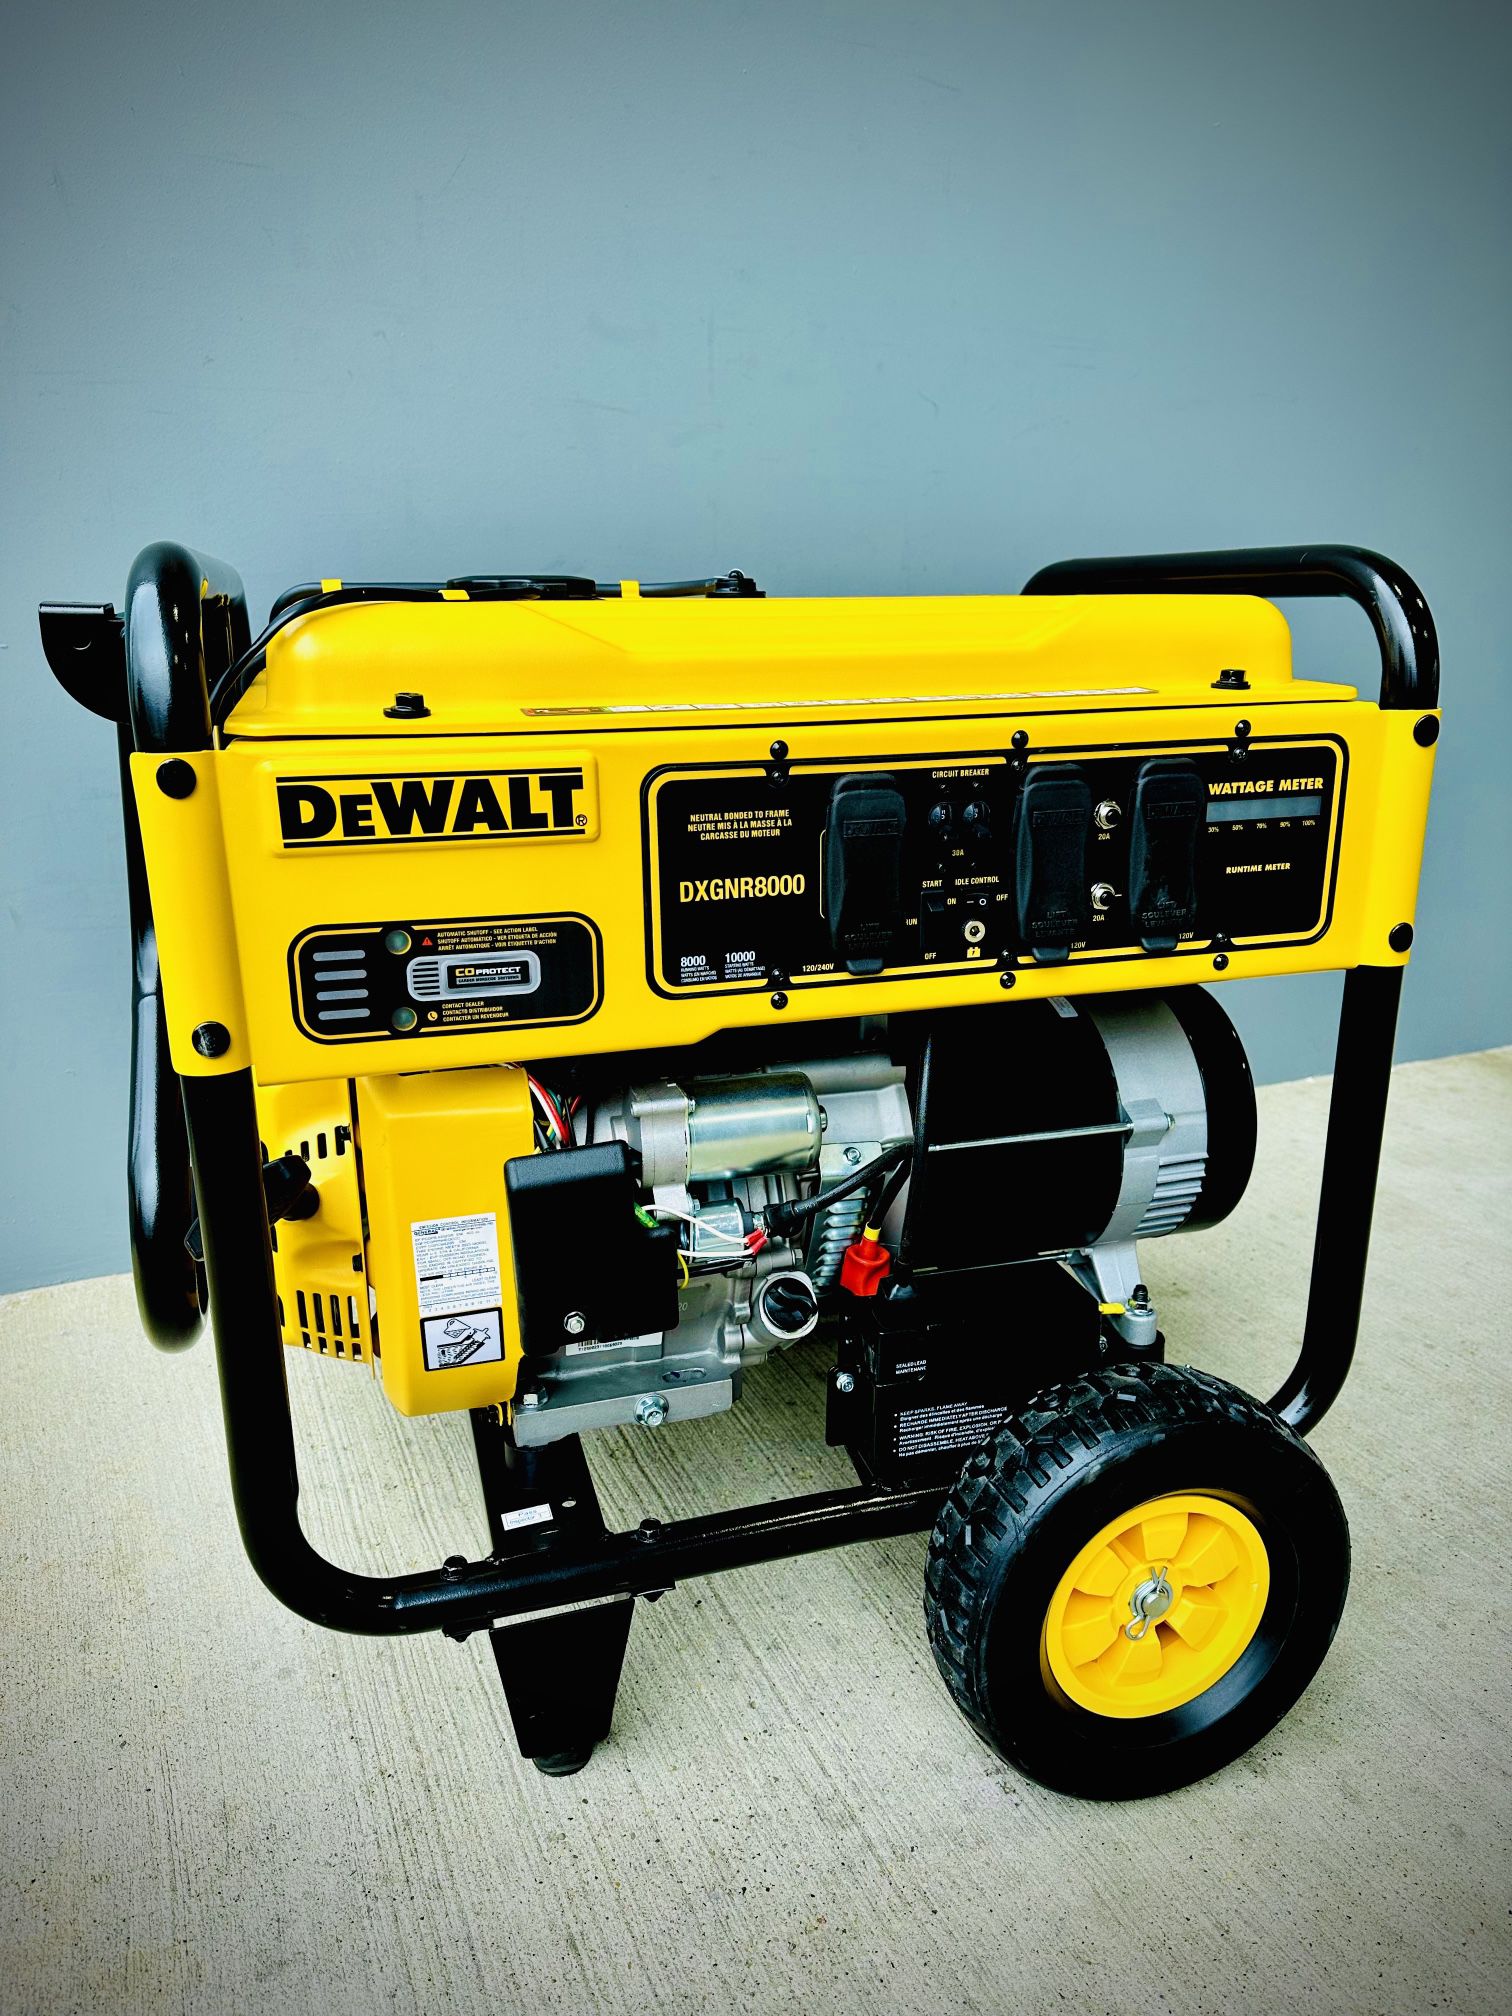 Brand new Dewalt 8000-Watt Electric Start Gas-Powered Portable Generator with Idle Control, GFCI Outlets and CO Protect